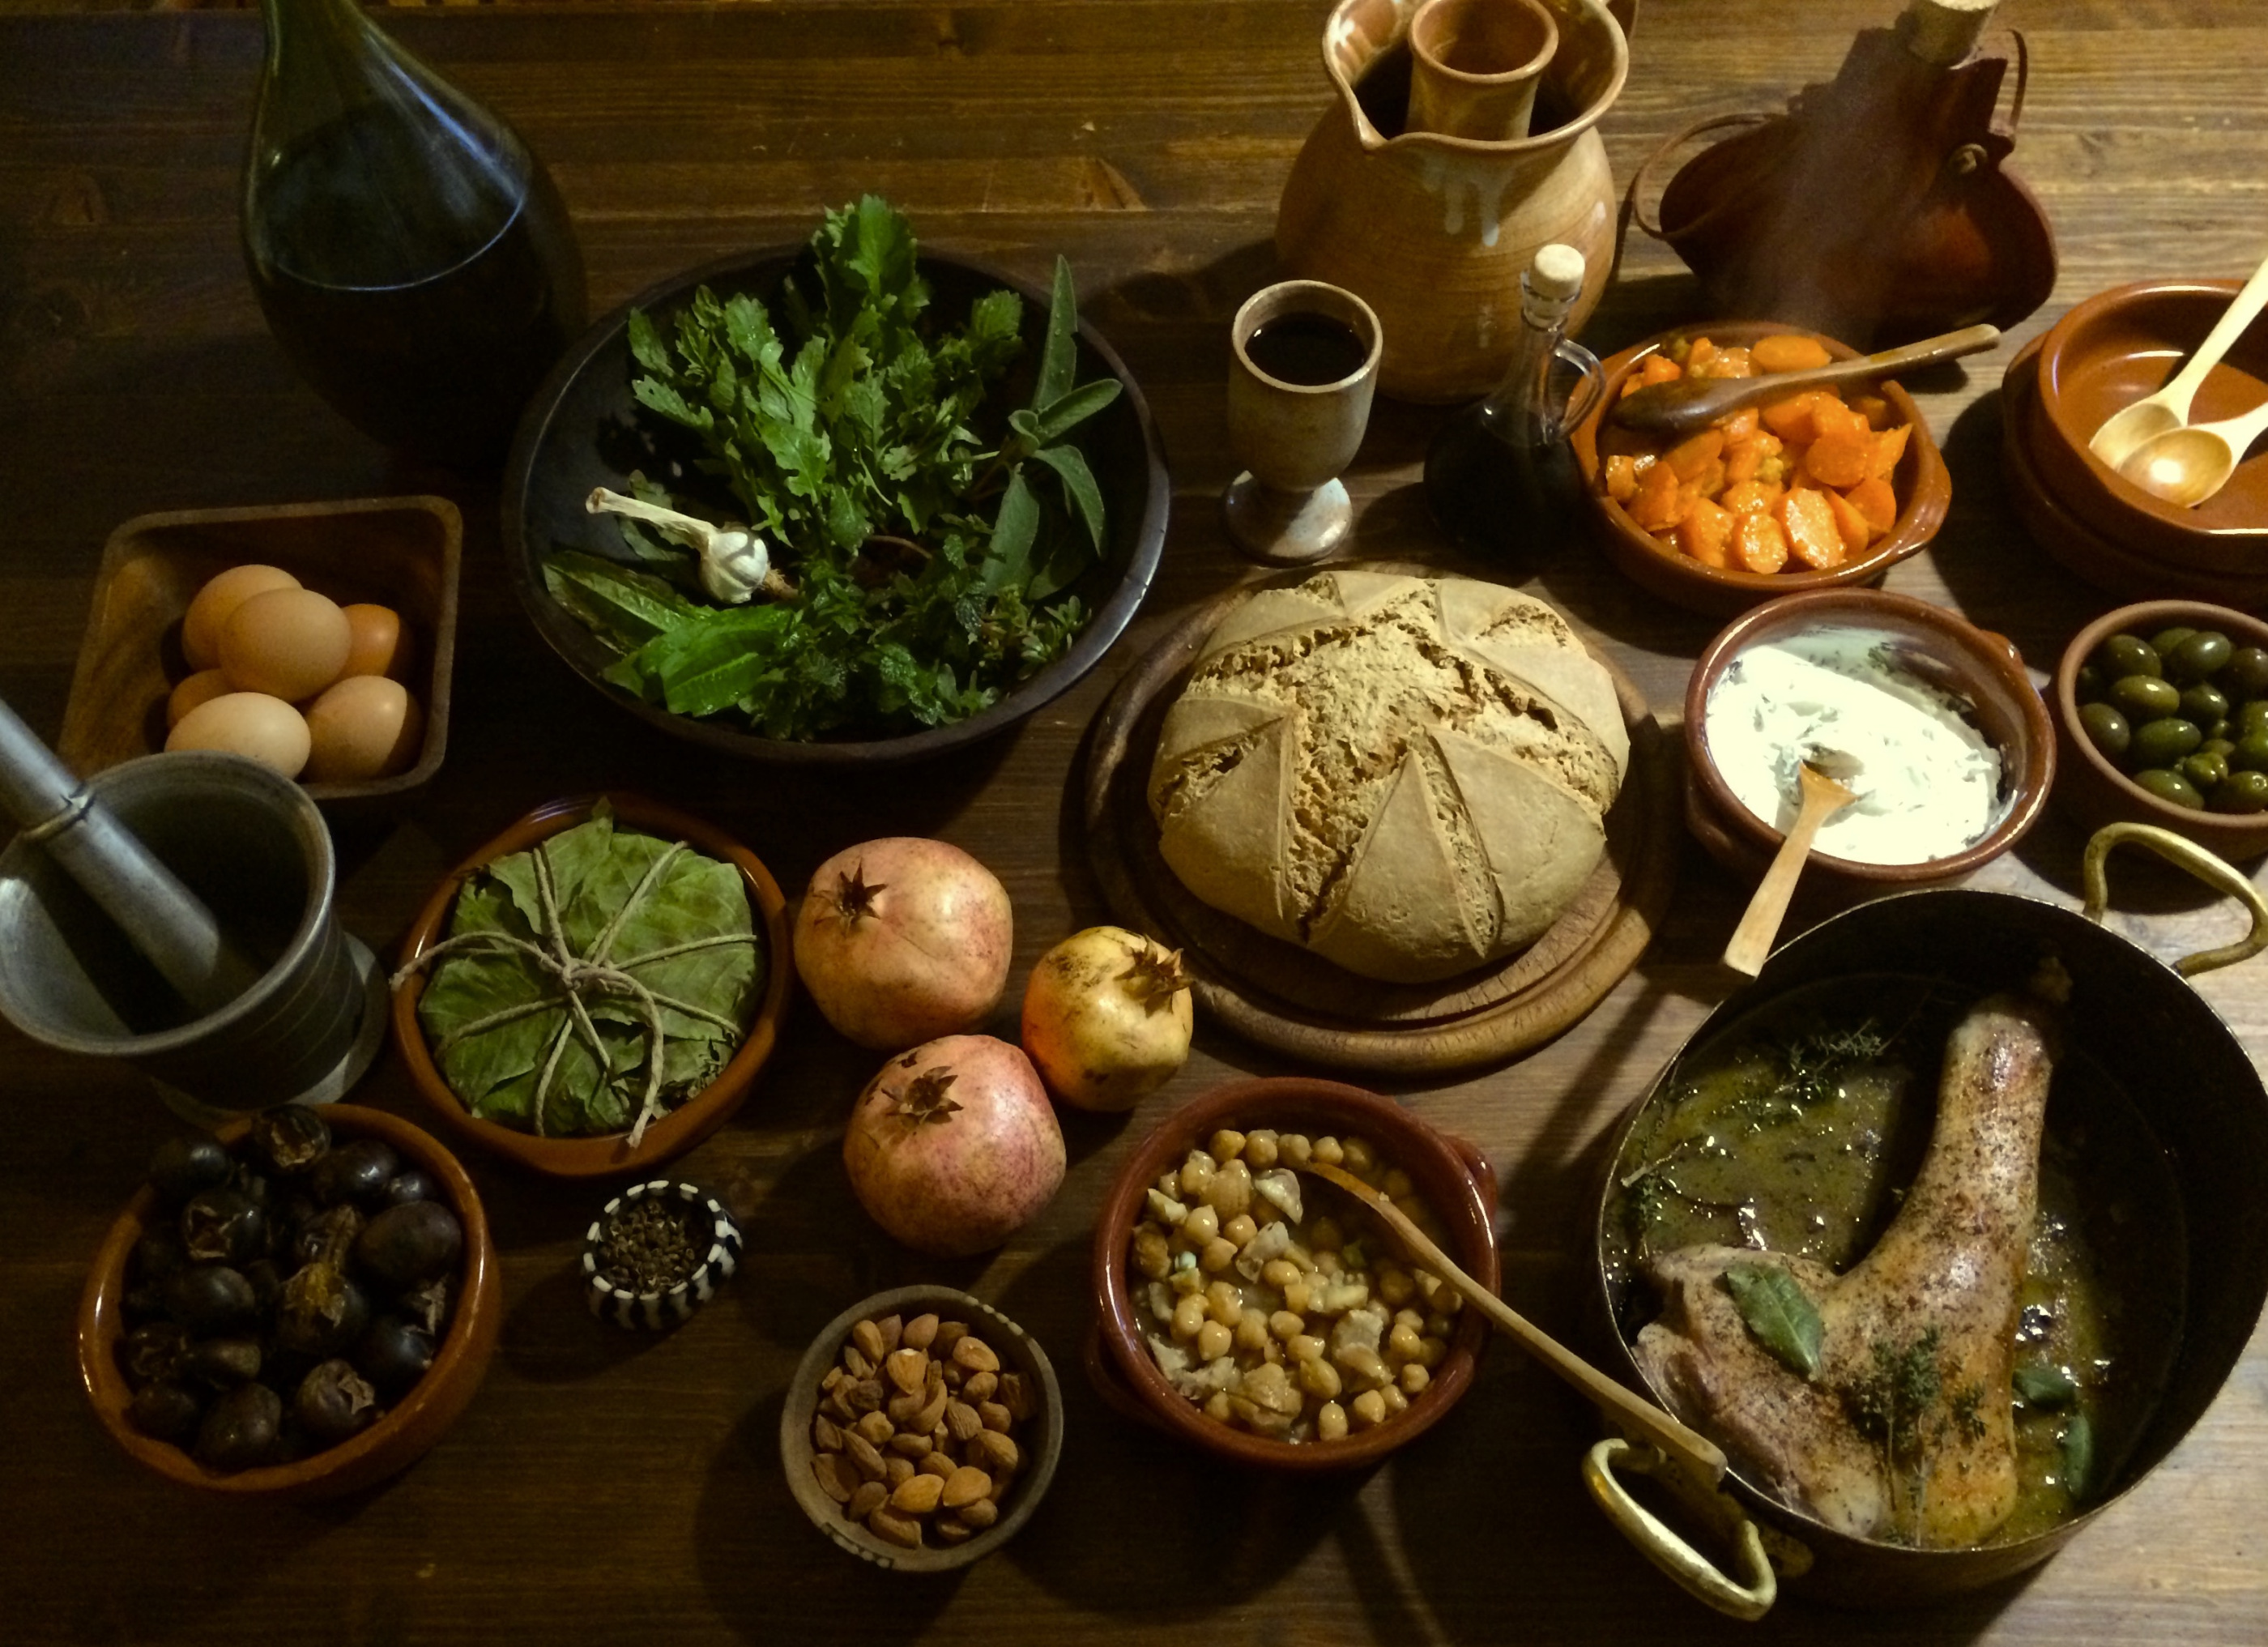 A Dinner Spread Based On Meals In Ancient Rome